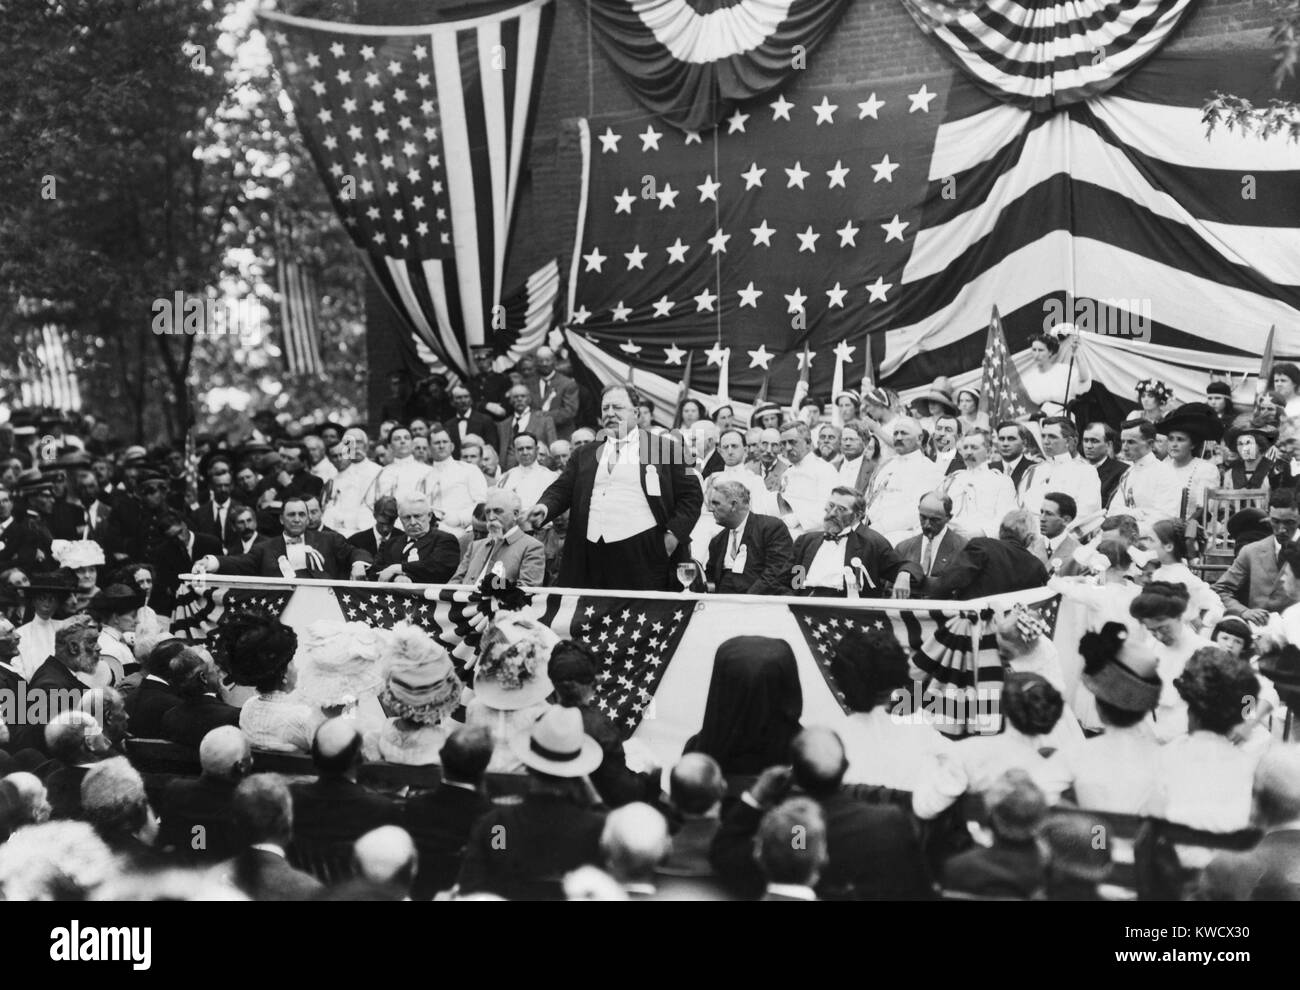 50th anniversary observance of the First Battle of Bull Run, July 18, 1911. President William Howard Taft delivers the keynote address to a crowd of 10,000 people. 300 aged Confederates and 125 Federal veterans attended the Civil War ‘Peace Jubilee’ (BSLOC 2017 2 120) Stock Photo